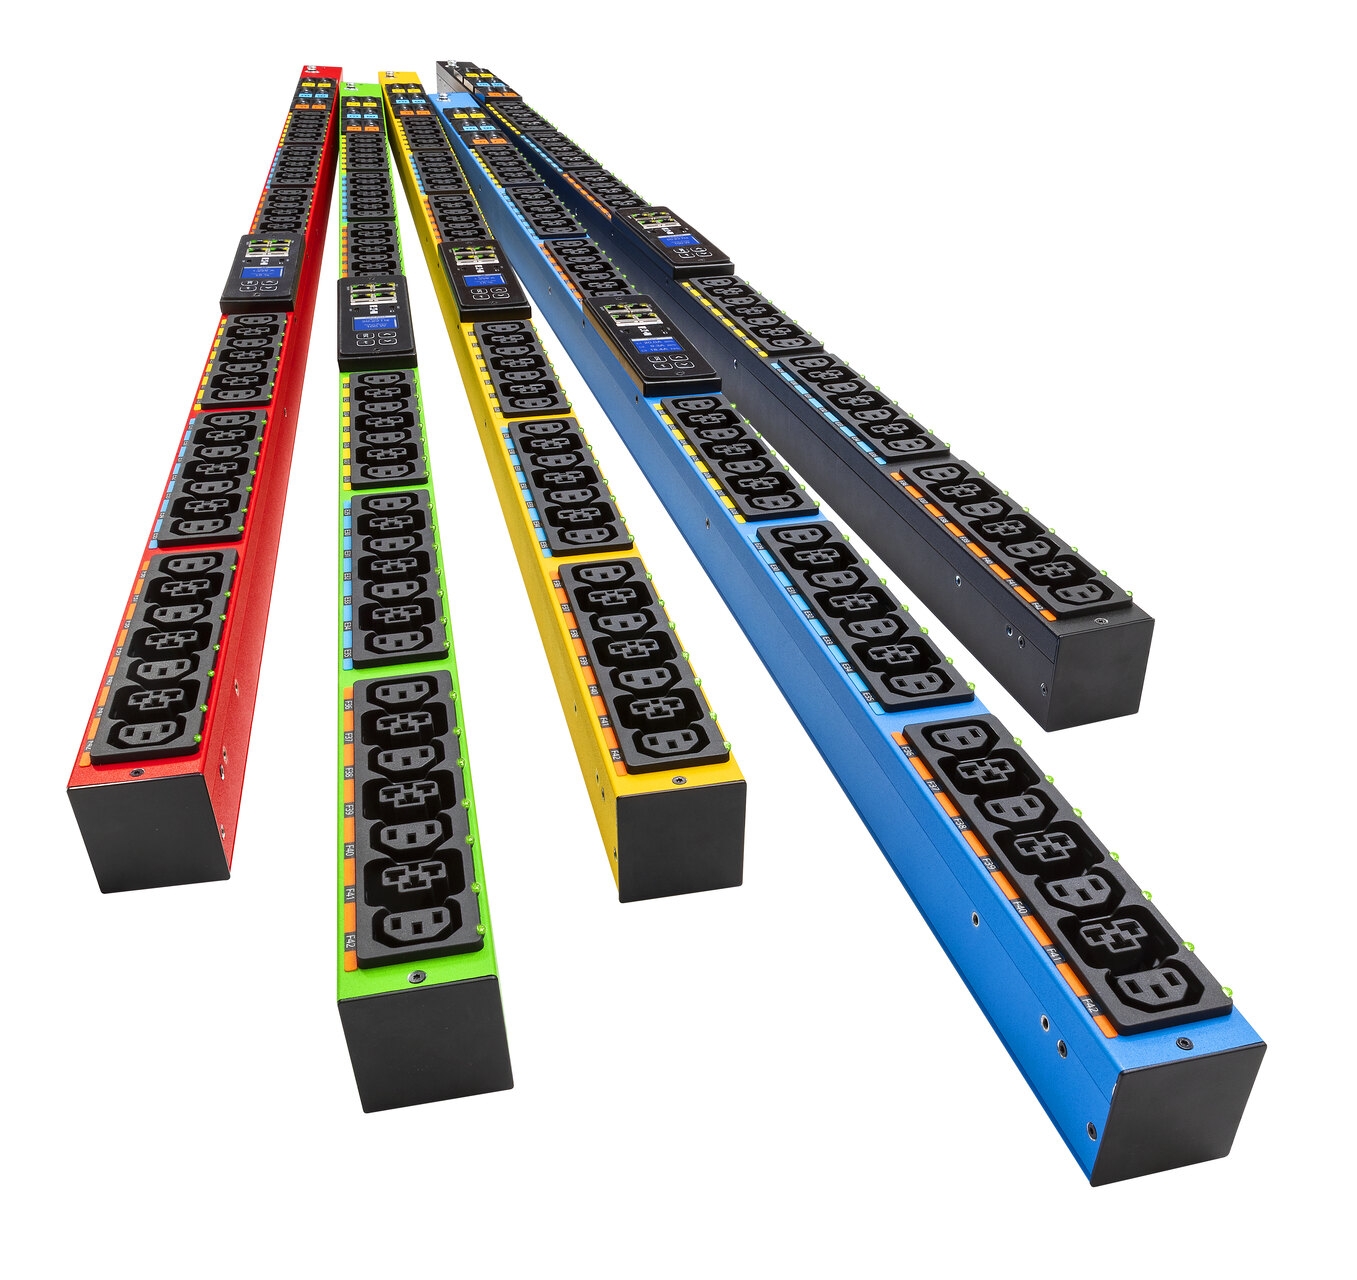 Rack: Eaton's G4 PDU is the end-to-end solution with low environmental impact, combining energy savings with advanced and reliable performance